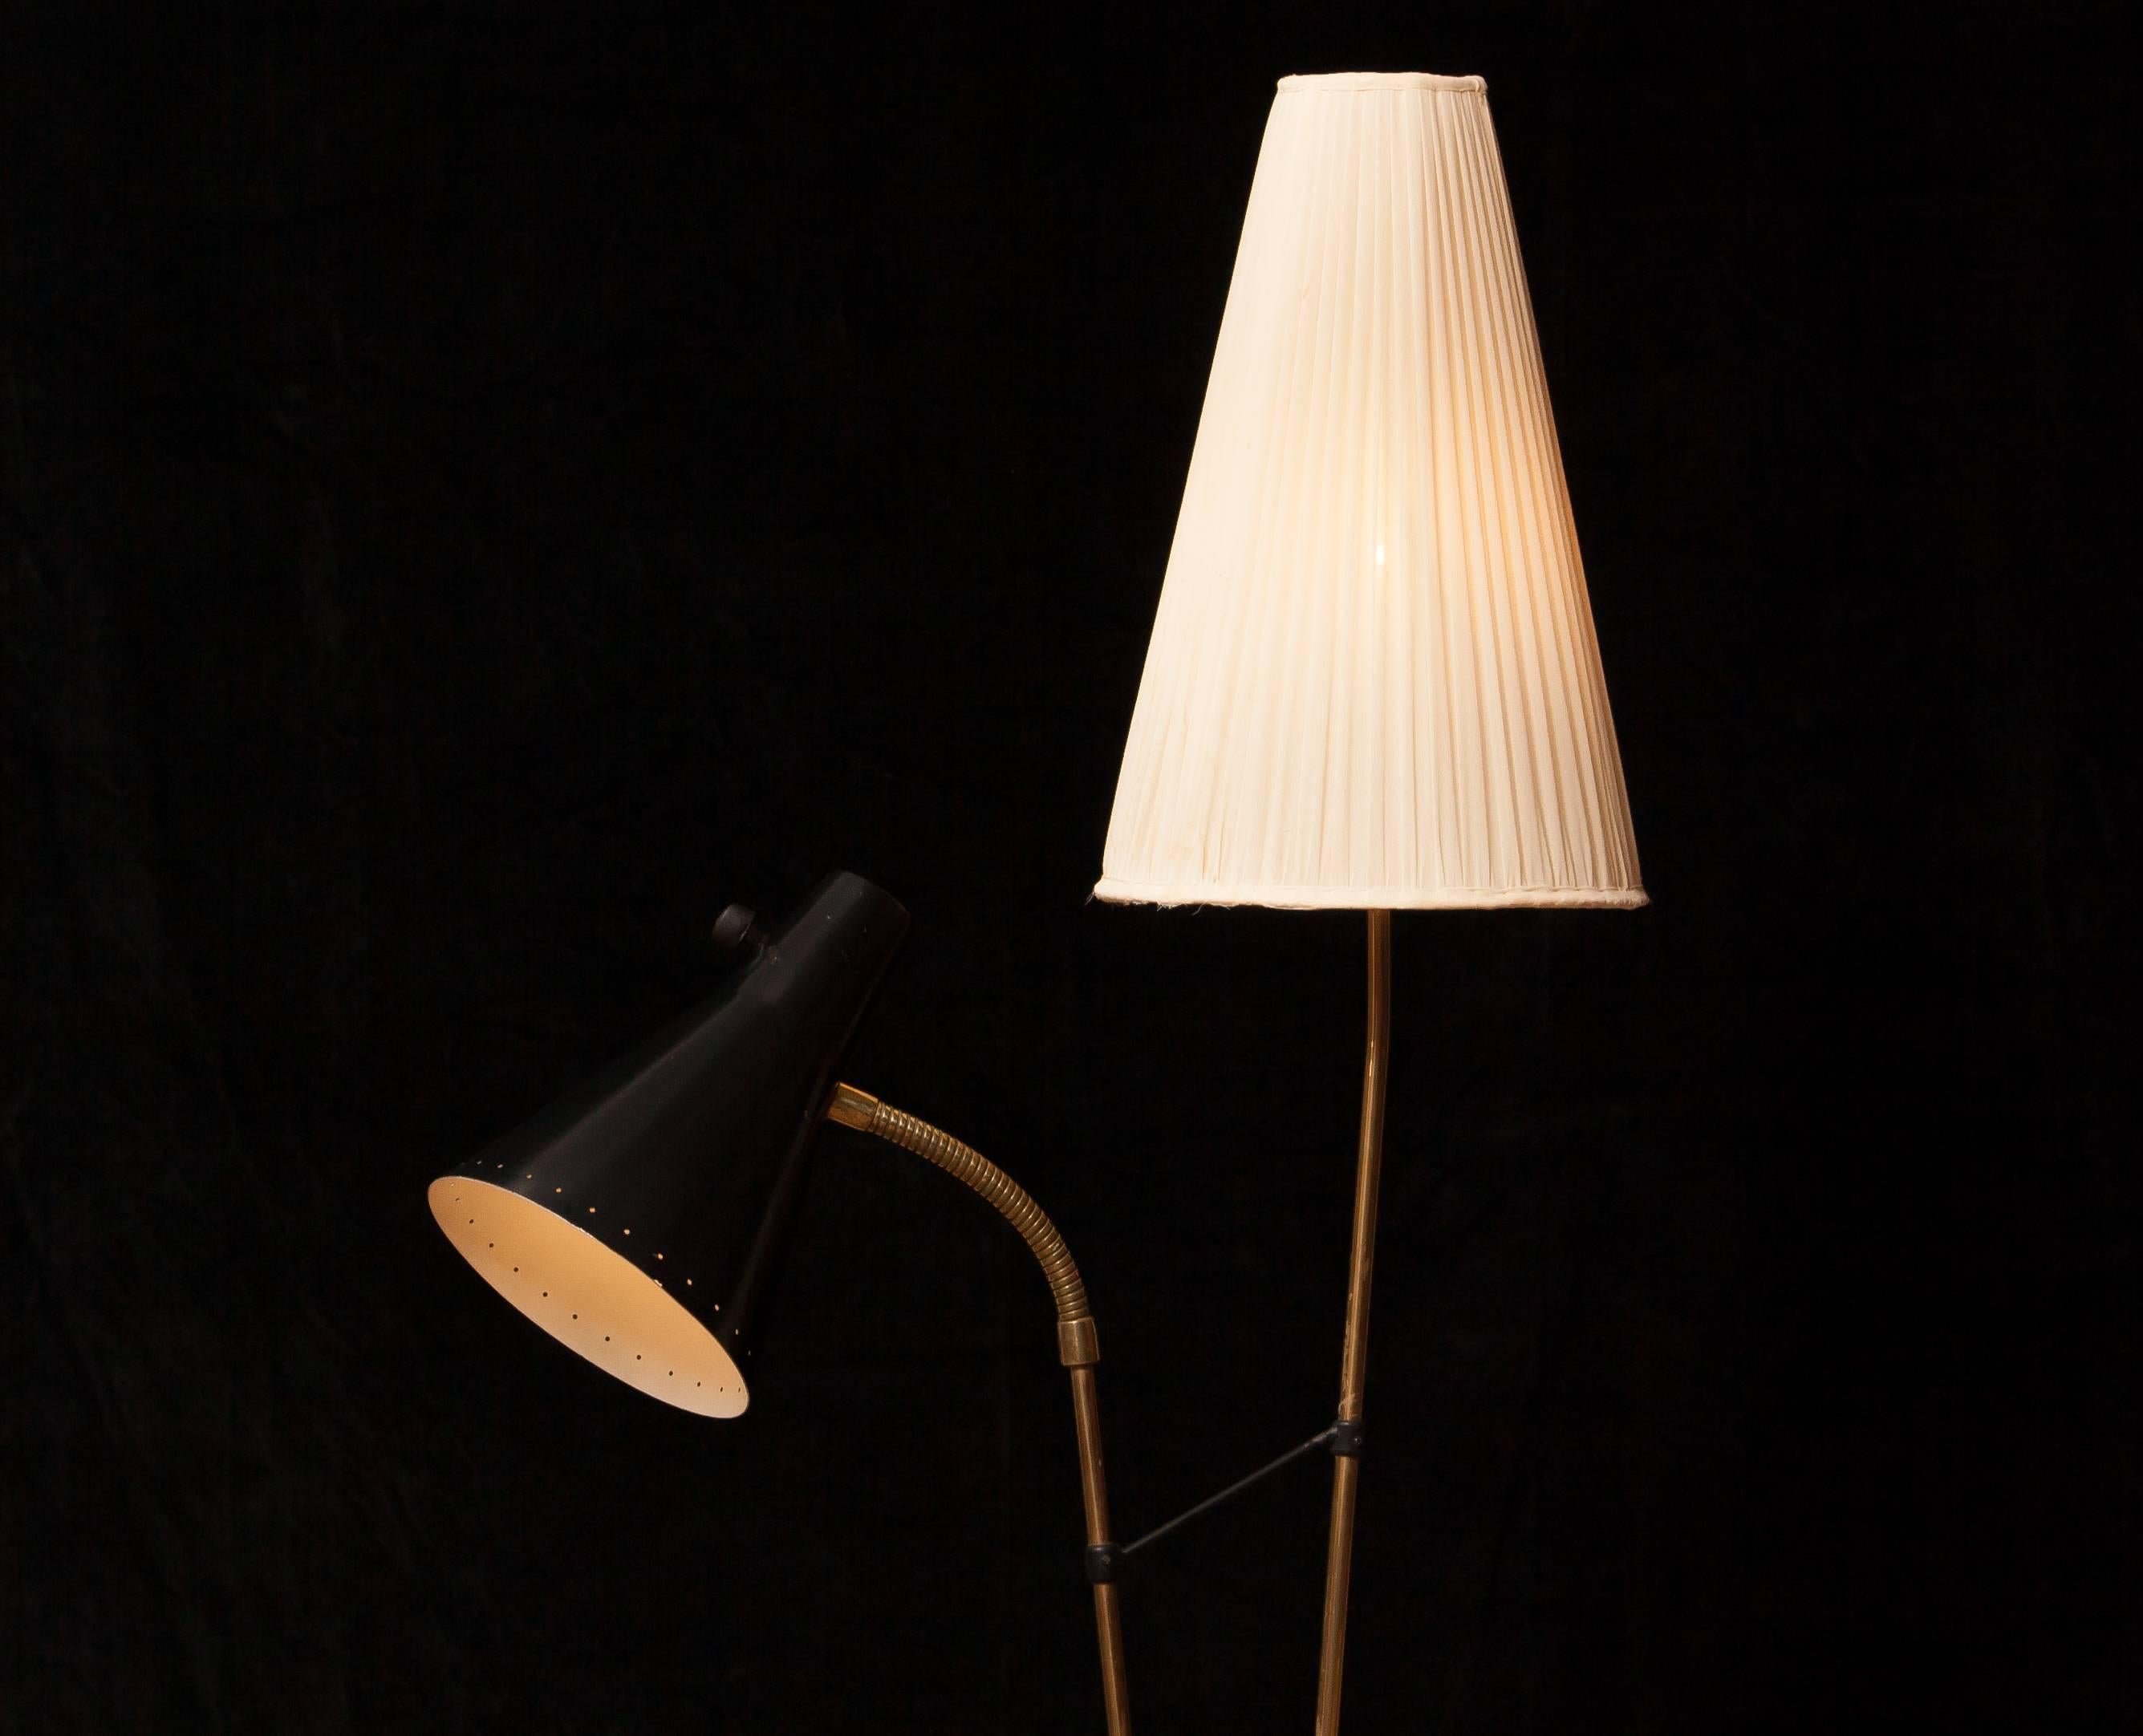 Beautiful floor lamp designed by Hans Bergström for Ateljé Lyktan, Sweden.
This lamp consist of two different shades; one black lacquered metal and one off-white fabric .
The stand is made of brass with a beautiful rare feet.
It is in a very nice